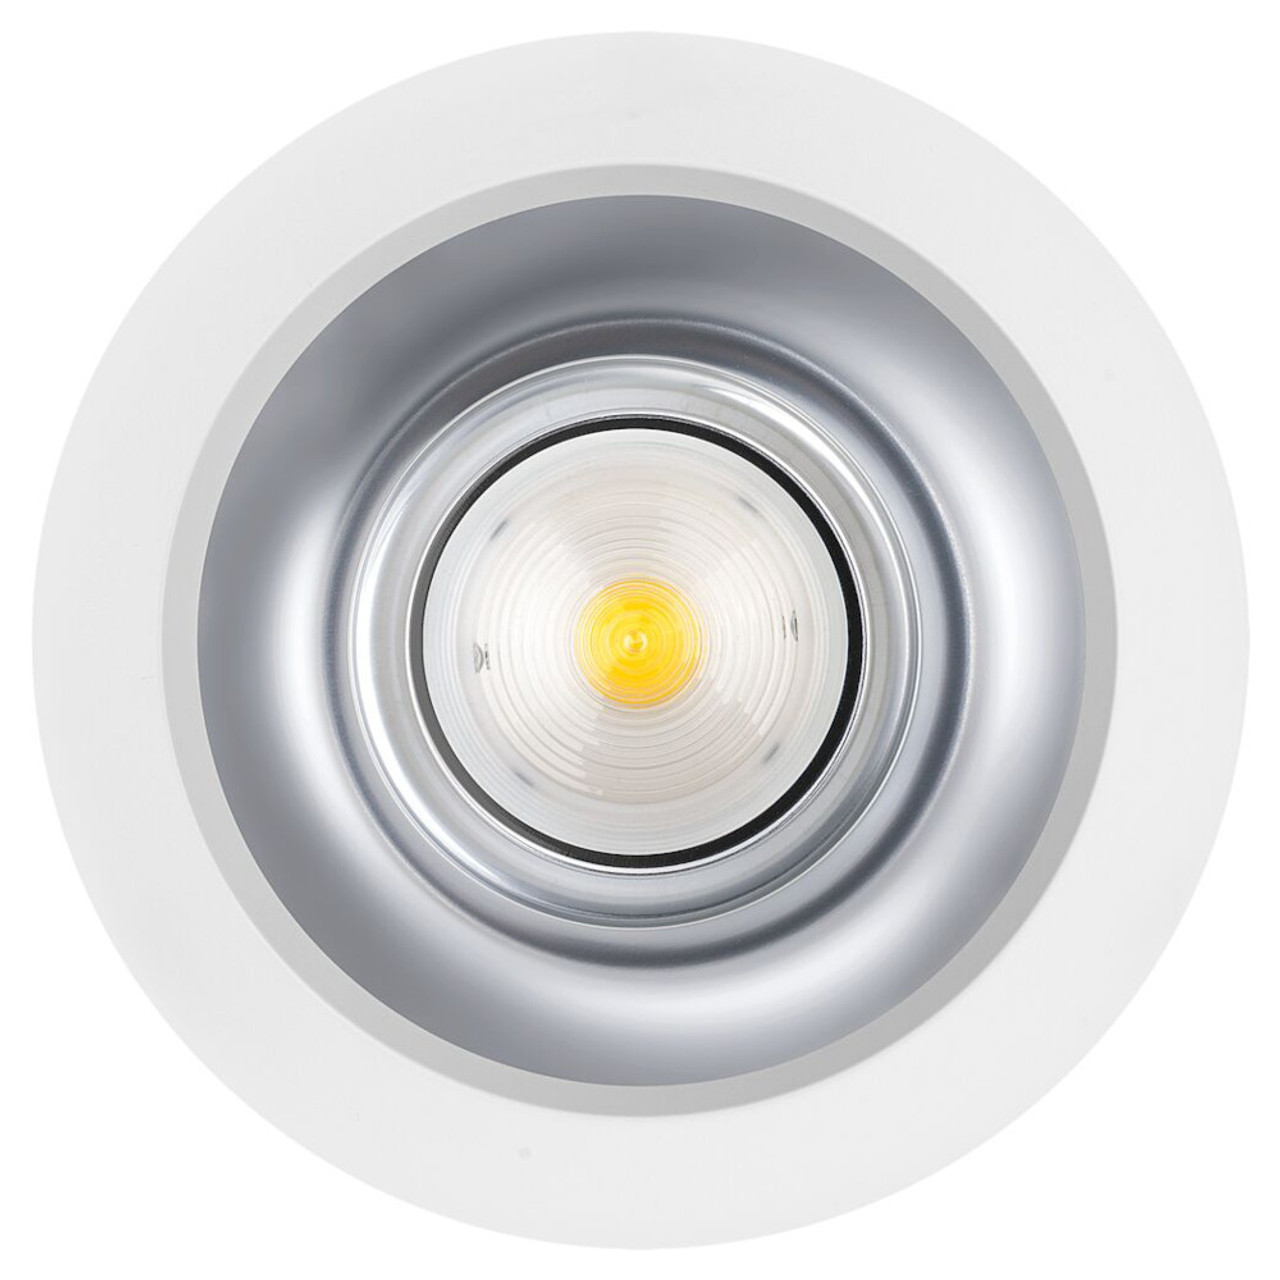 225mm LED Surface Mounted Downlight 13W 1650lm 4000K Gloss Reflector IP40